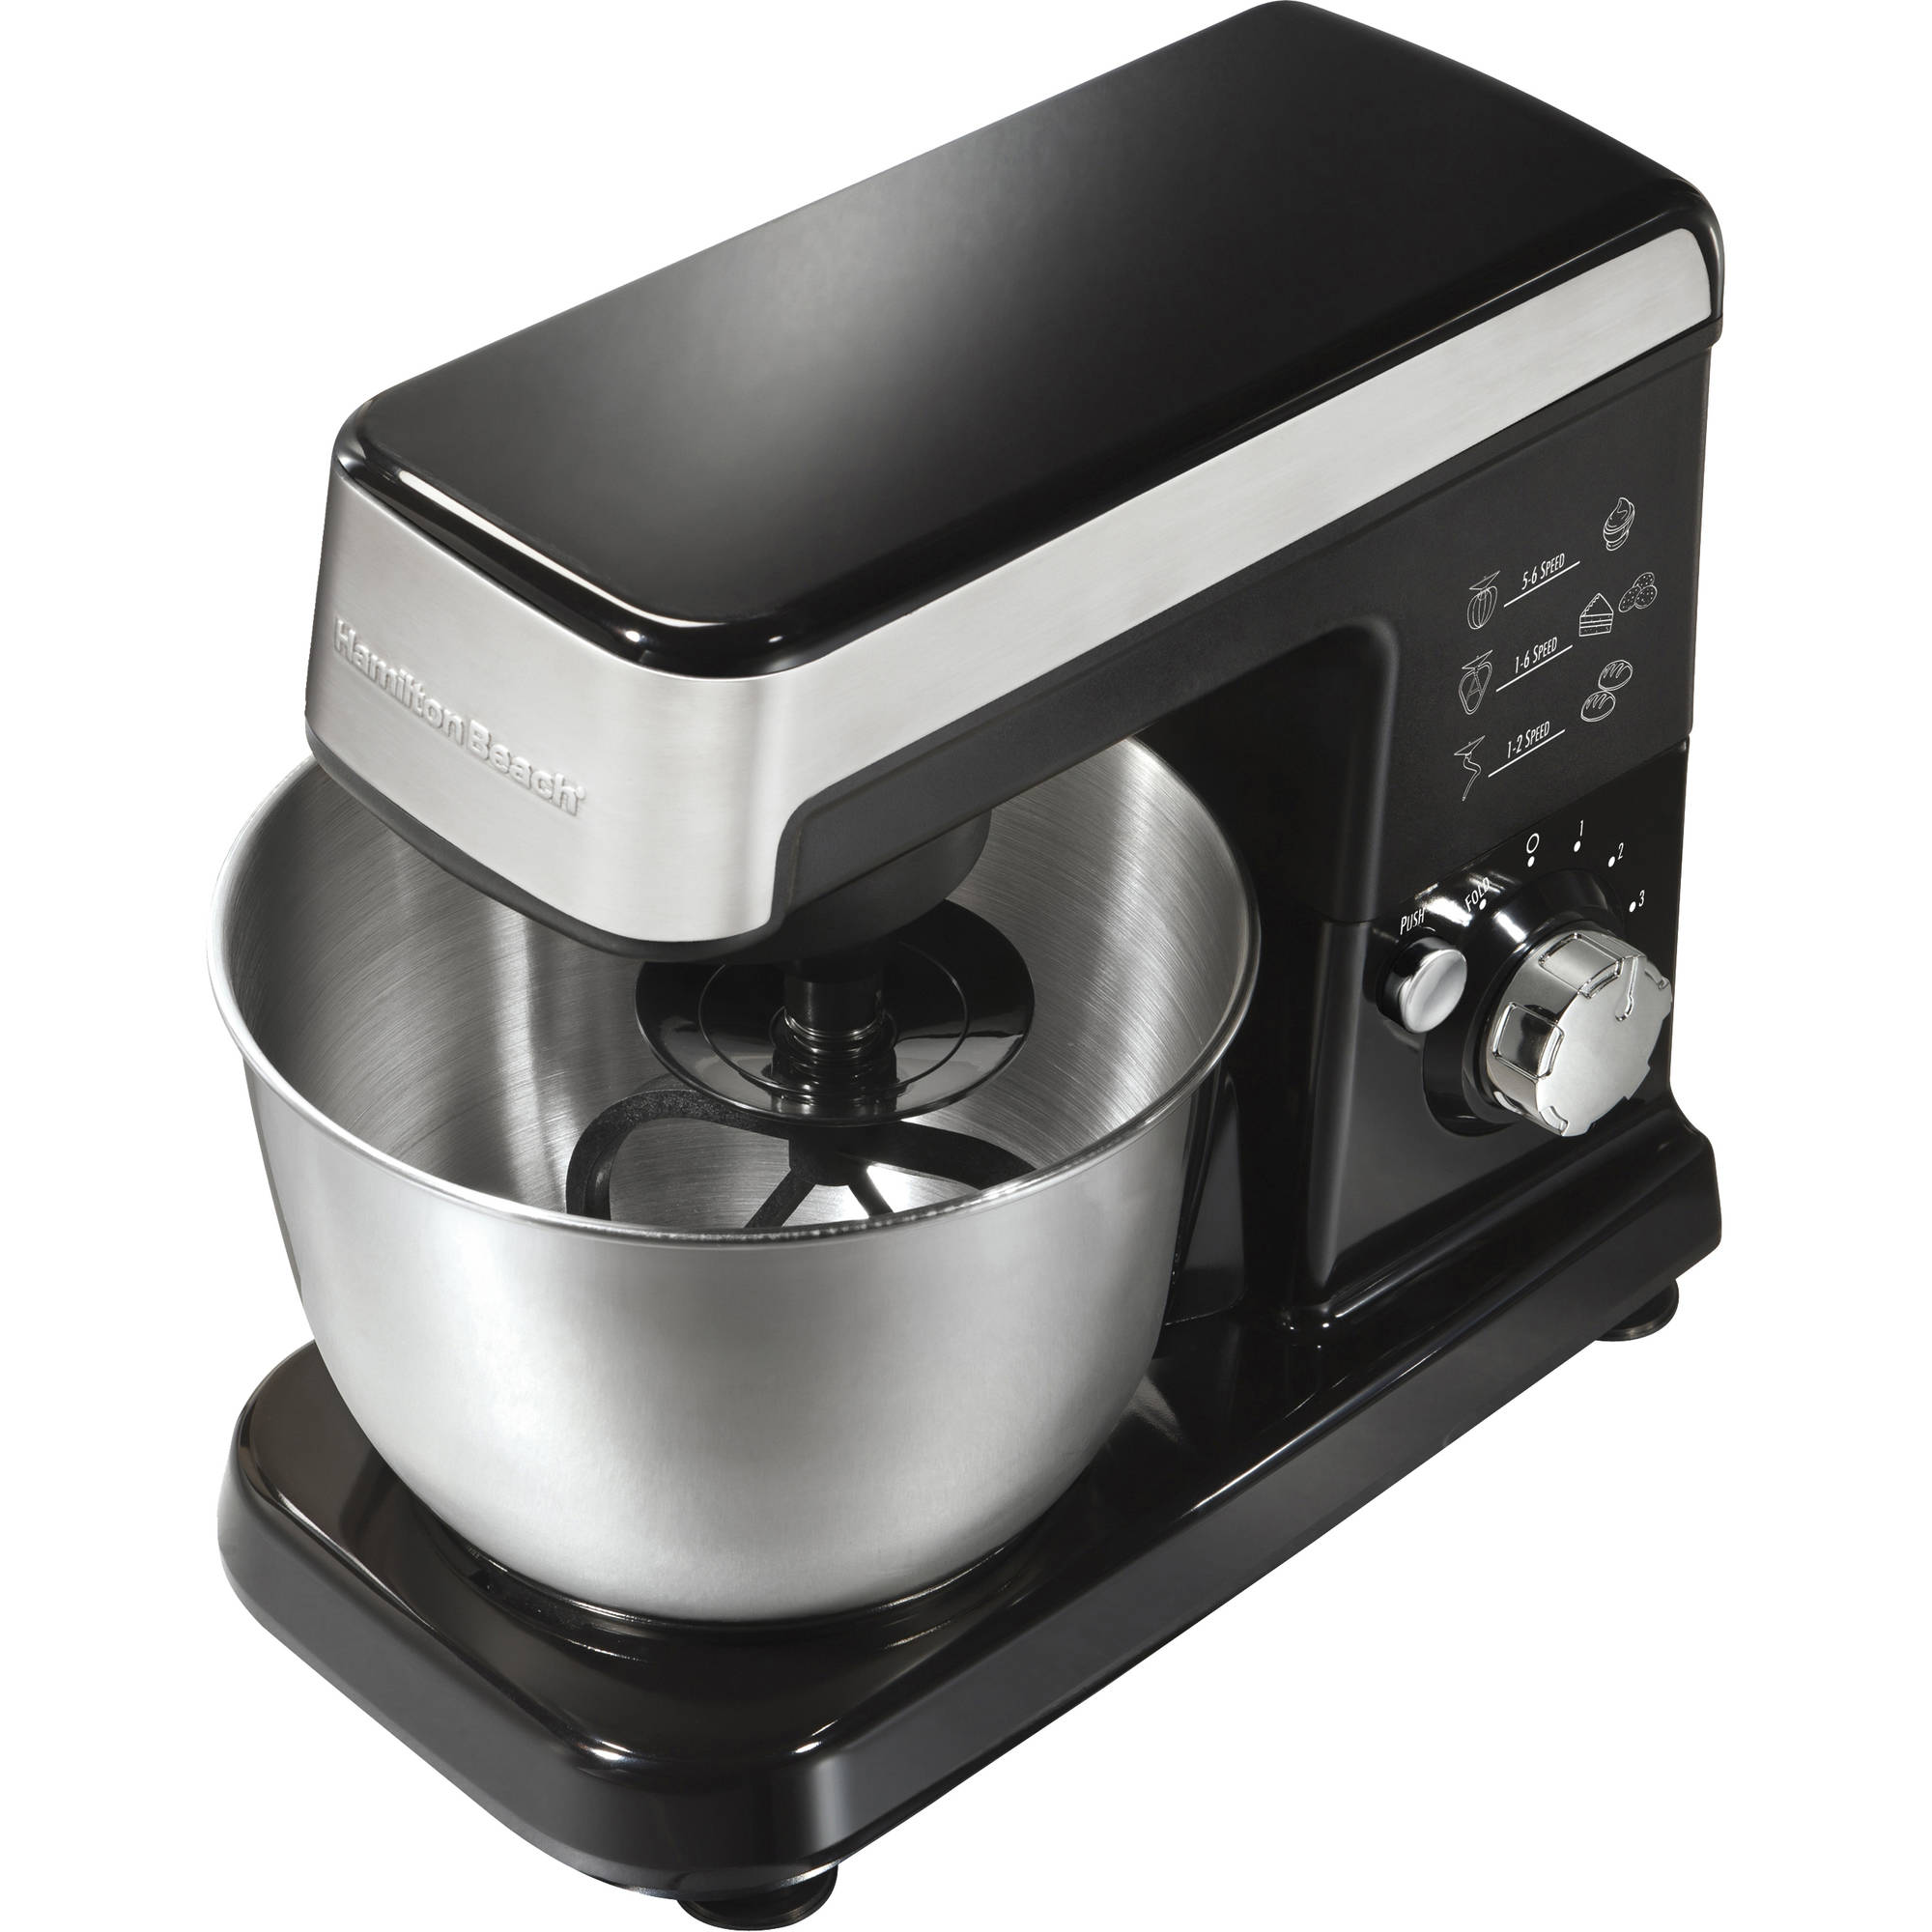 Hamilton Beach 3.5 Quart Stand Mixer with Planetary Mixing Action | Model# 63327 - image 1 of 4